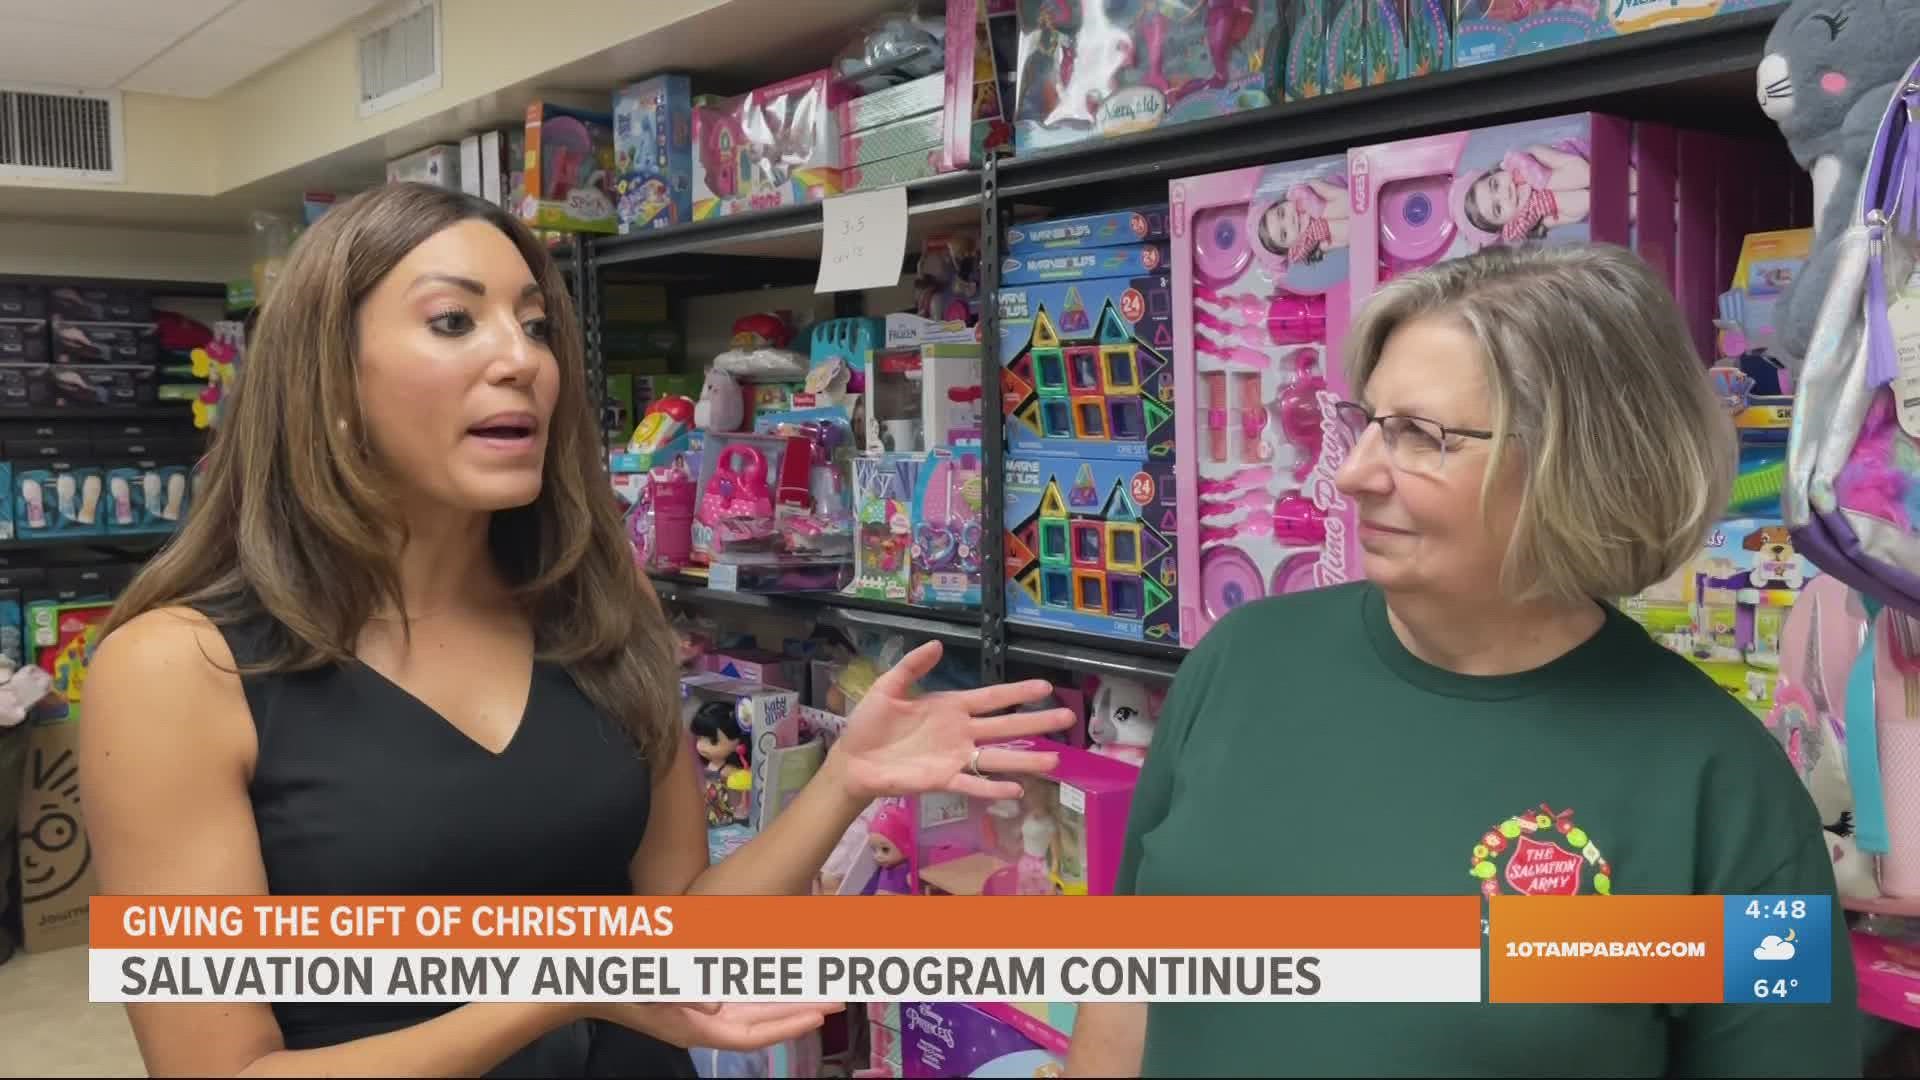 Achieva Credit Union and 10 Tampa Bay have partnered with The Salvation Army for its Angel Tree program.